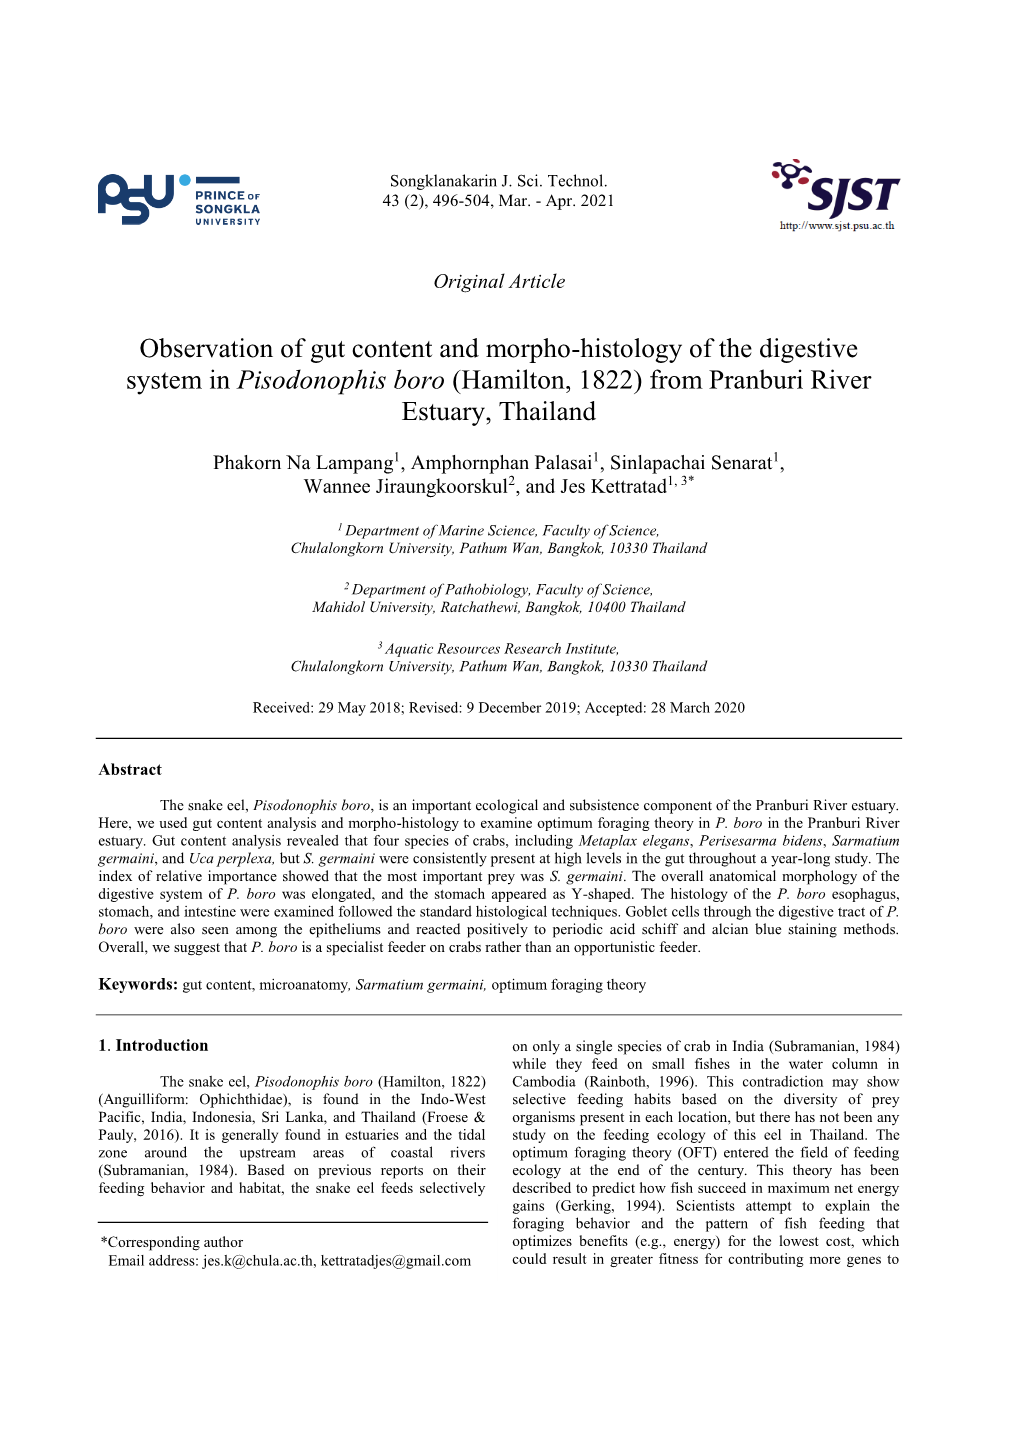 Observation of Gut Content and Morpho-Histology of the Digestive System in Pisodonophis Boro (Hamilton, 1822) from Pranburi River Estuary, Thailand